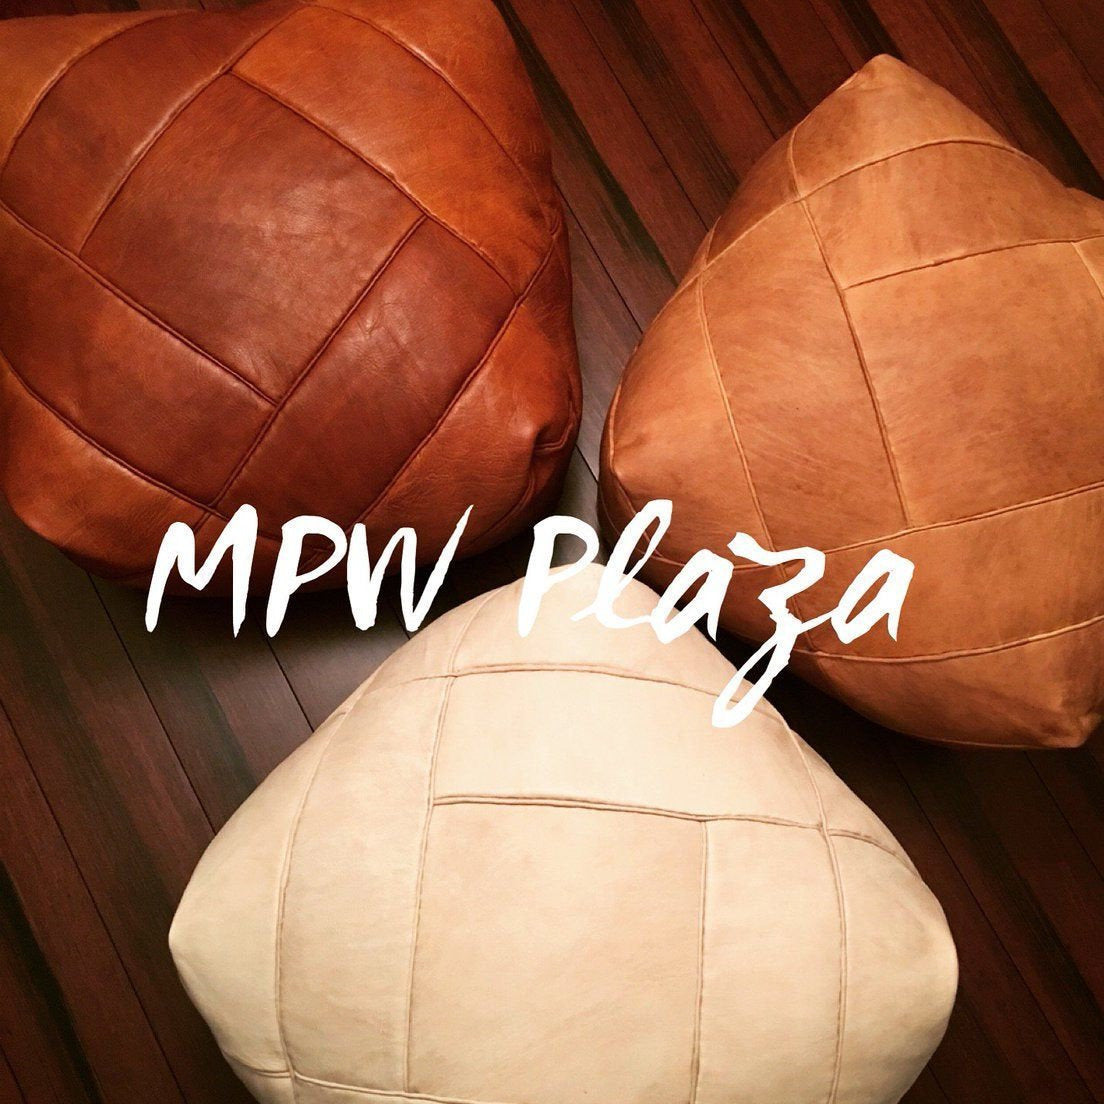 MPW Plaza® ZigZag Moroccan Pouf, Brown tone, Square 16" x 26" crafted by hand, Premium Moroccan Leather, Limited edition exclusive, couture ottoman (Stuffed) freeshipping - MPW Plaza®